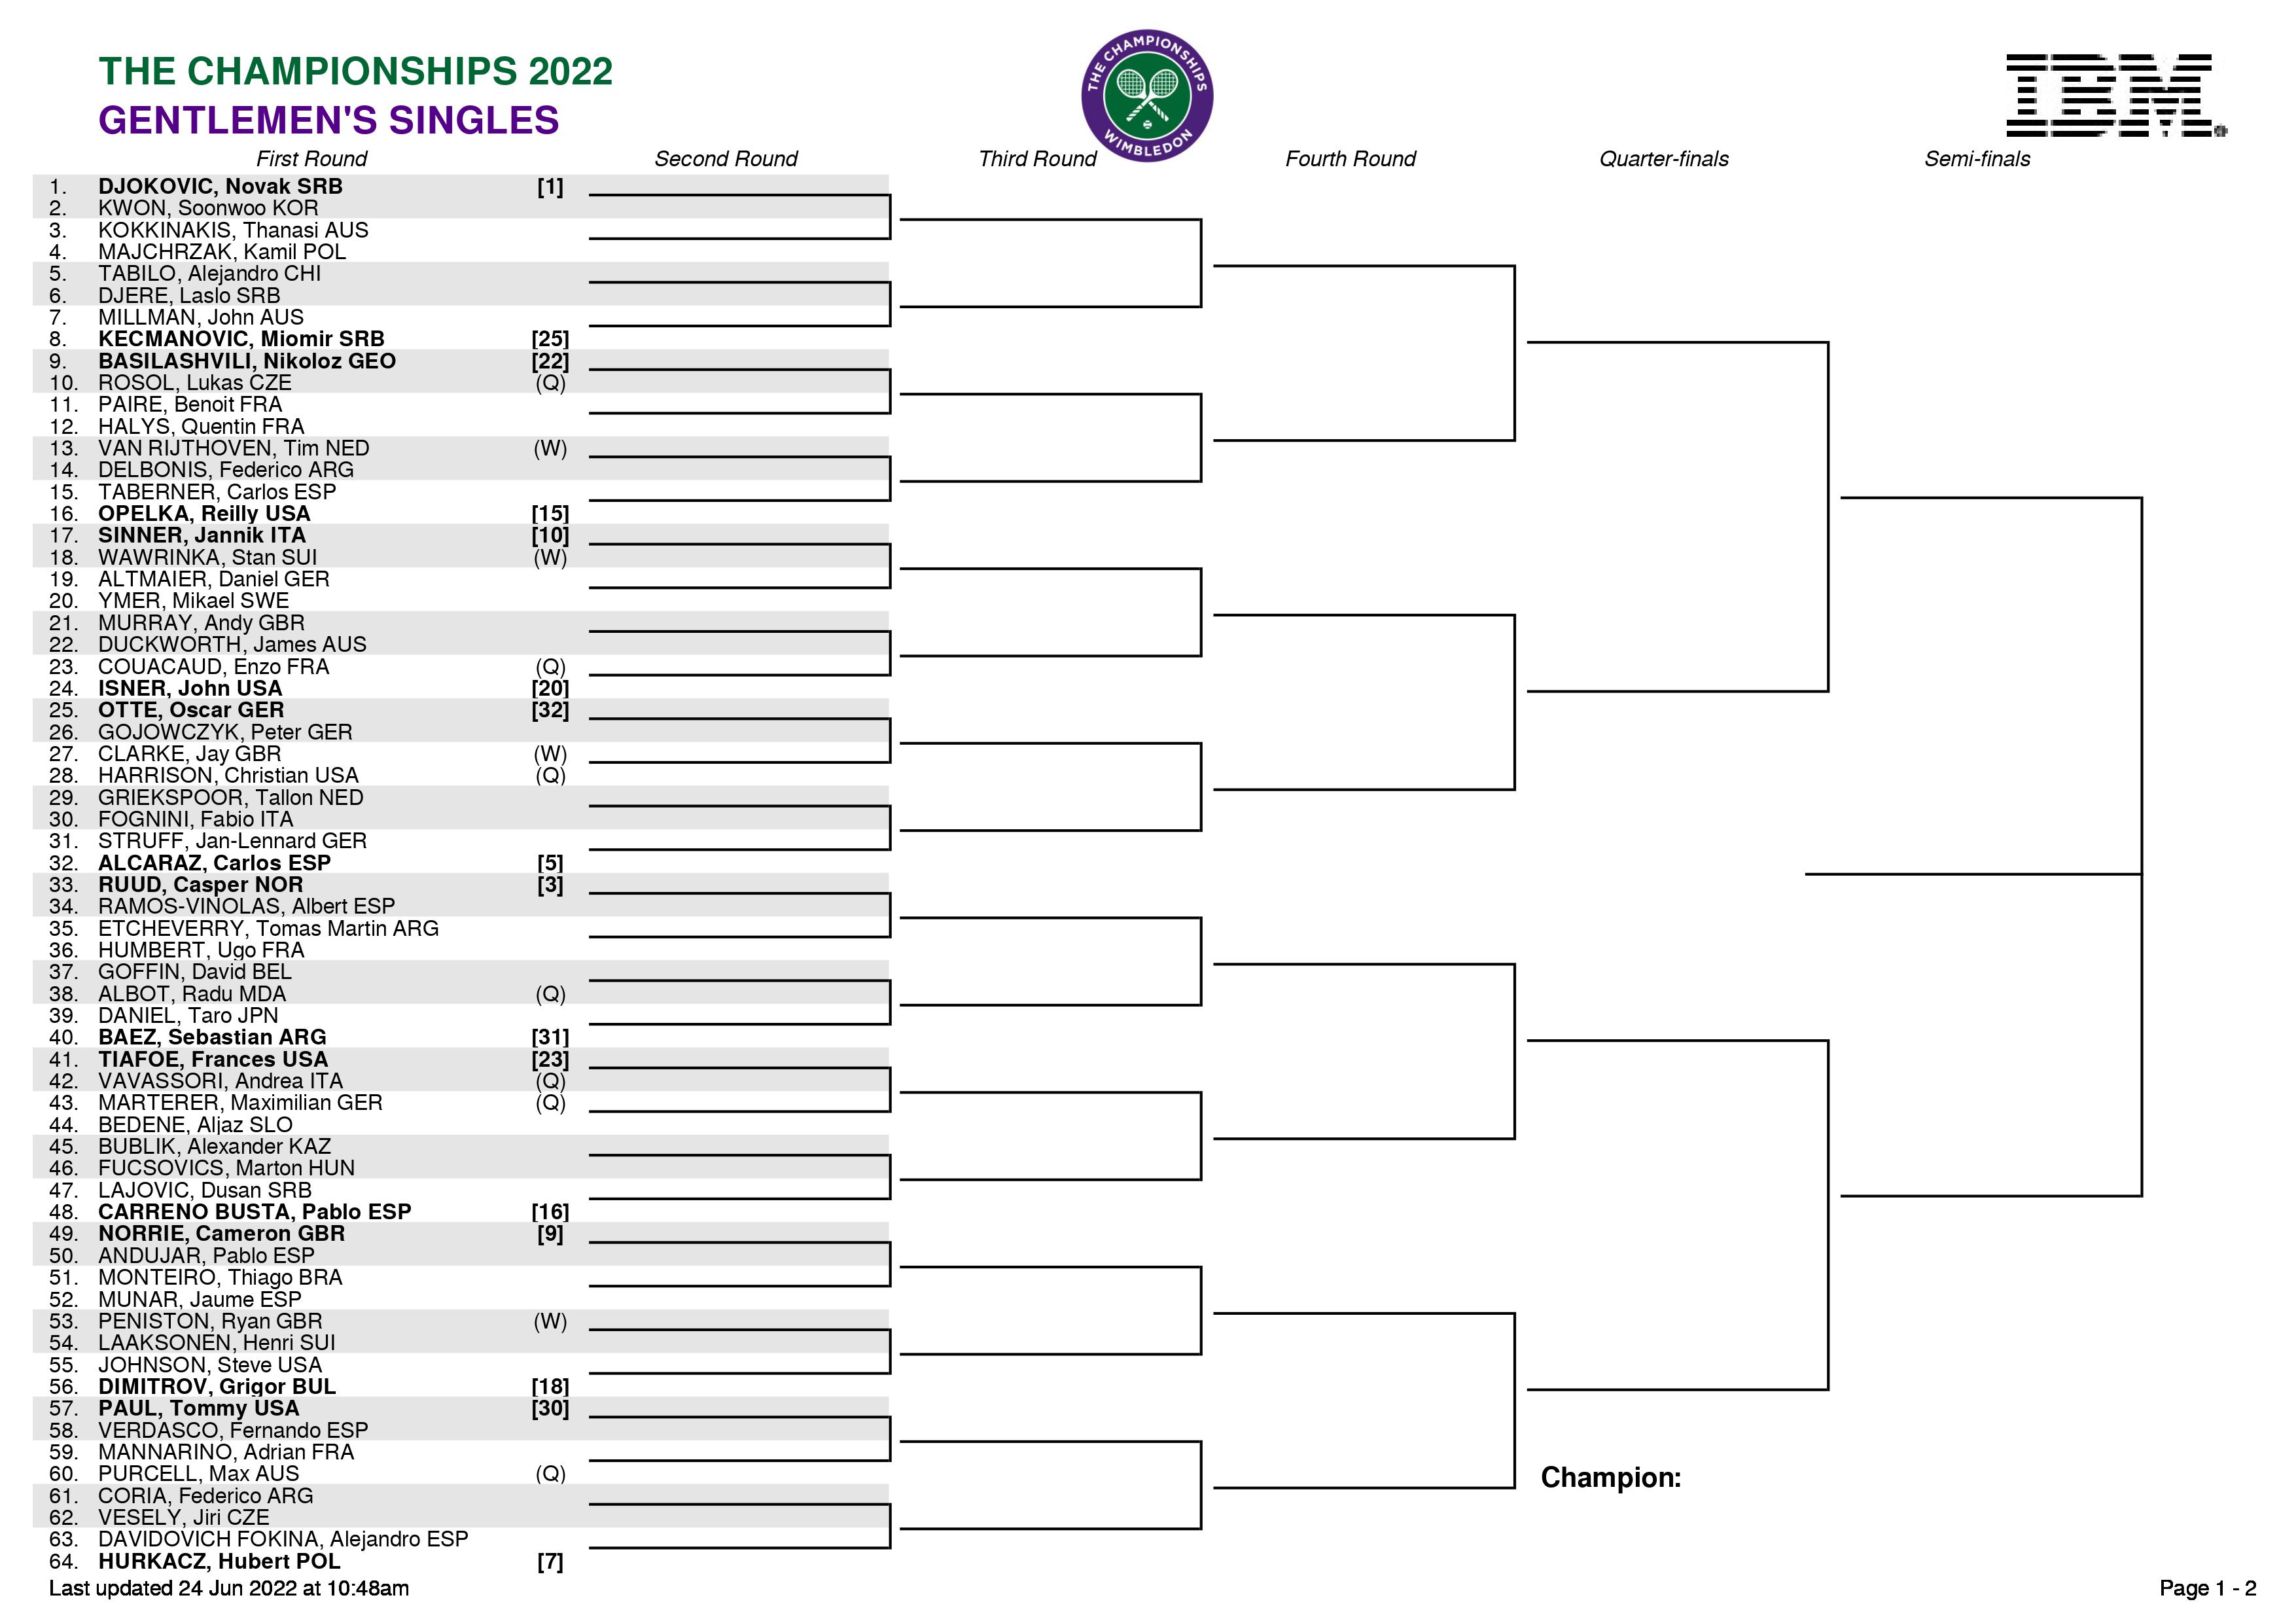 Wimbledon 2021: All you need to know, Draw, Schedule, Seedings, Prize  Money, Ranking Points, Records - Sportstar